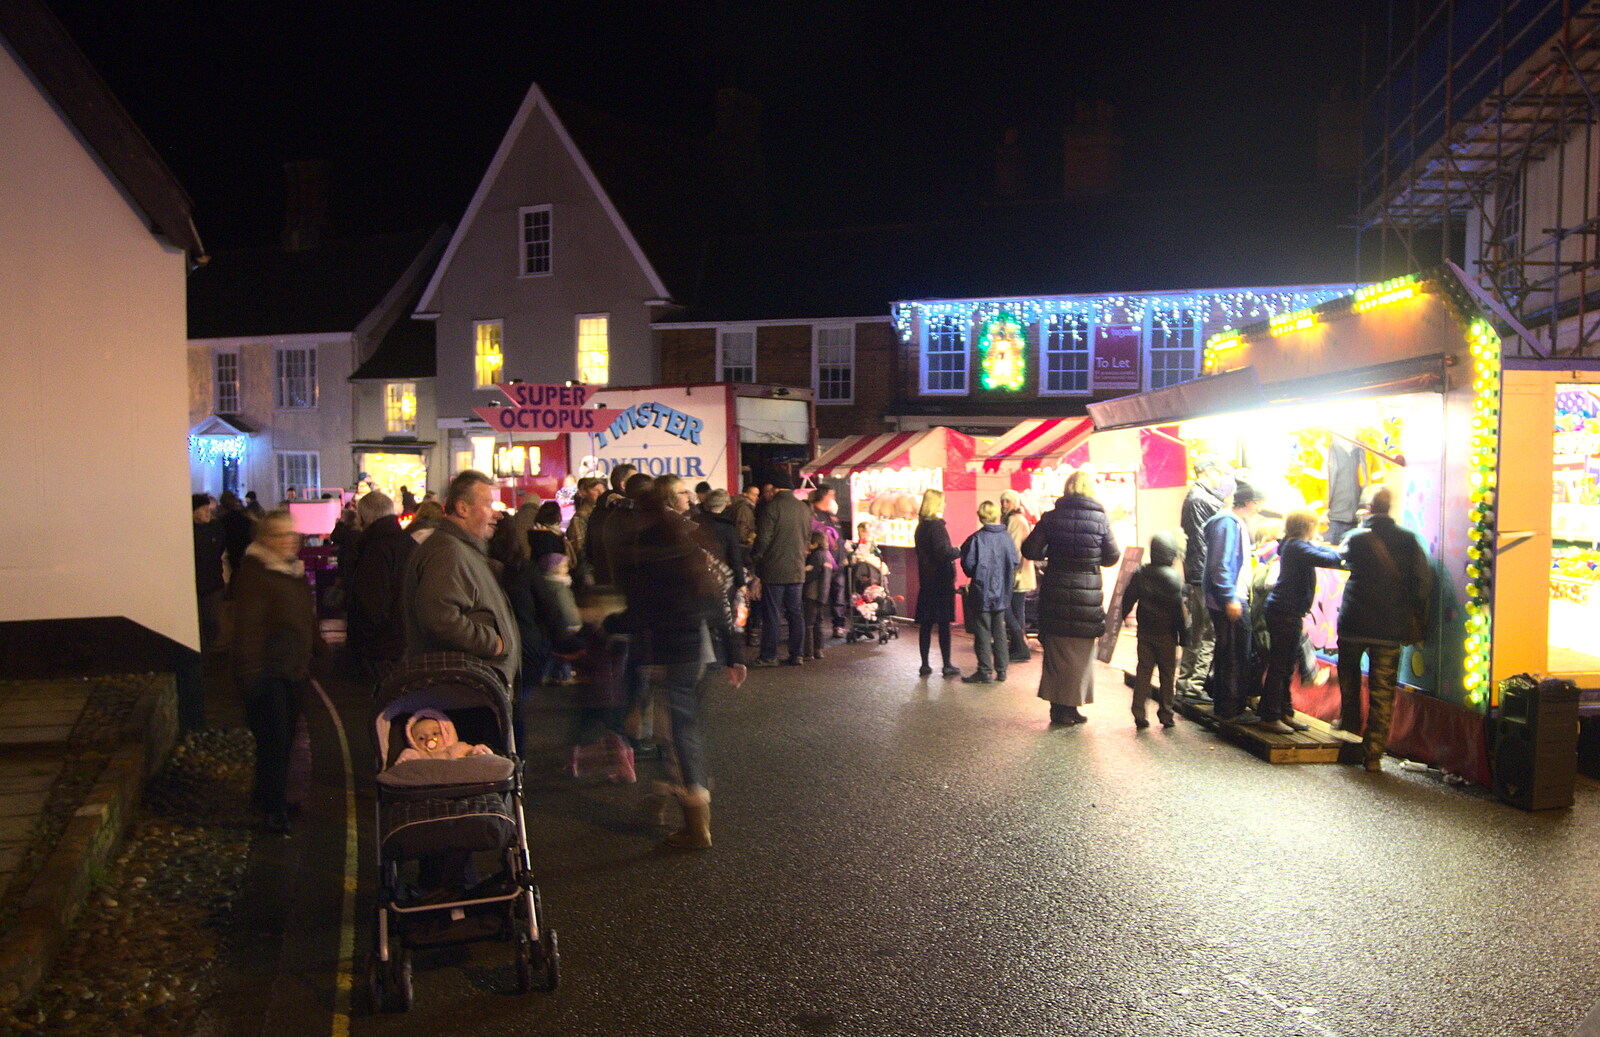 Fairground attractions on Lambseth Street from The Christmas Lights Switch On, Eye, Suffolk - 7th December 2012